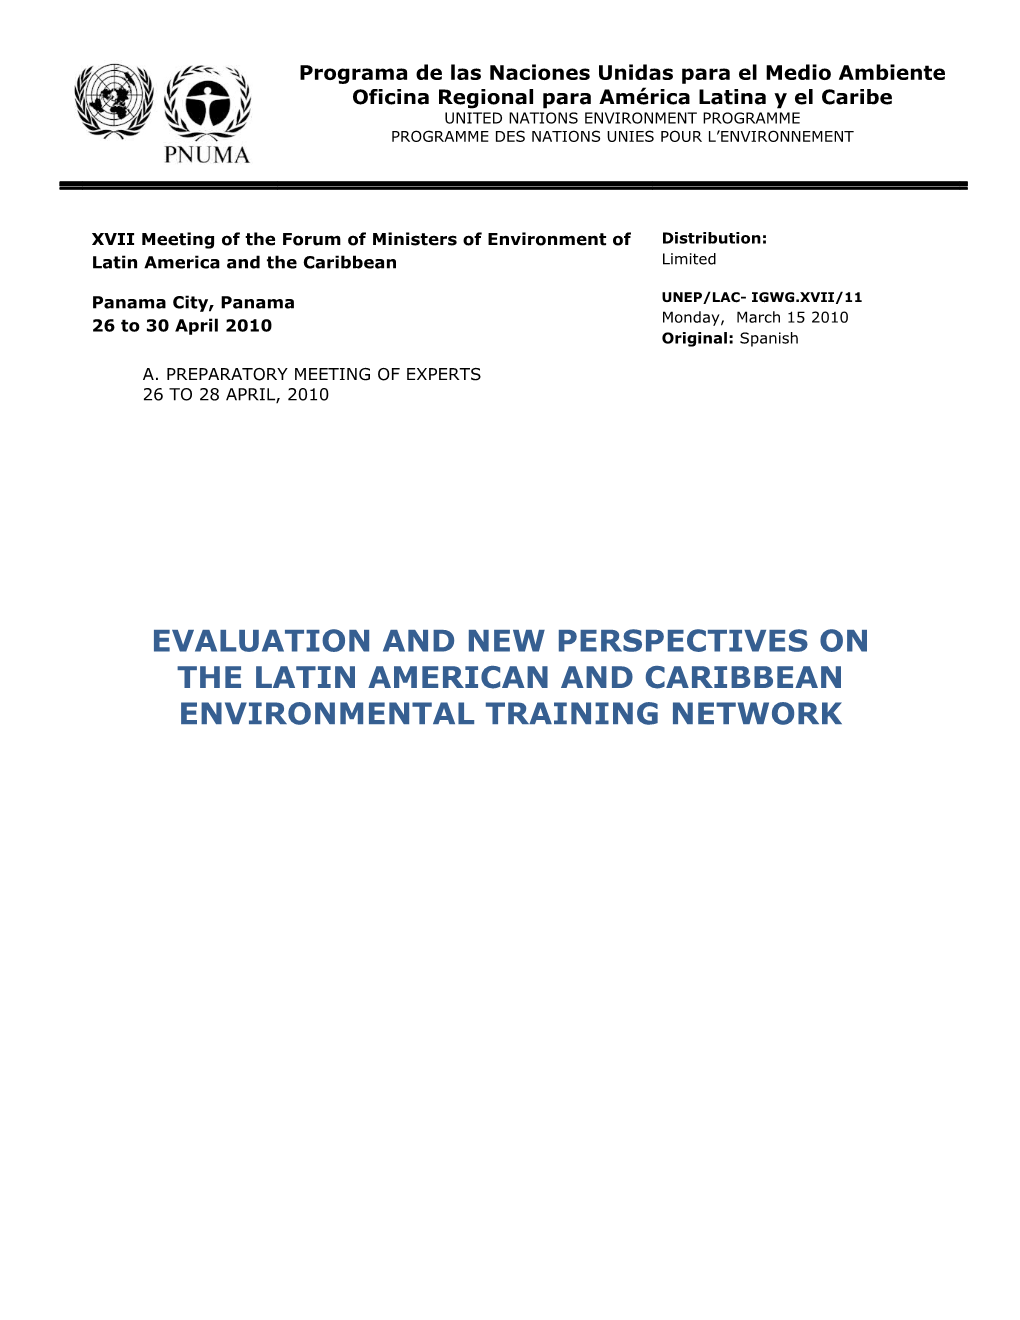 Evaluation and New Perspectives on the Latin American and Caribbean Environmental Training